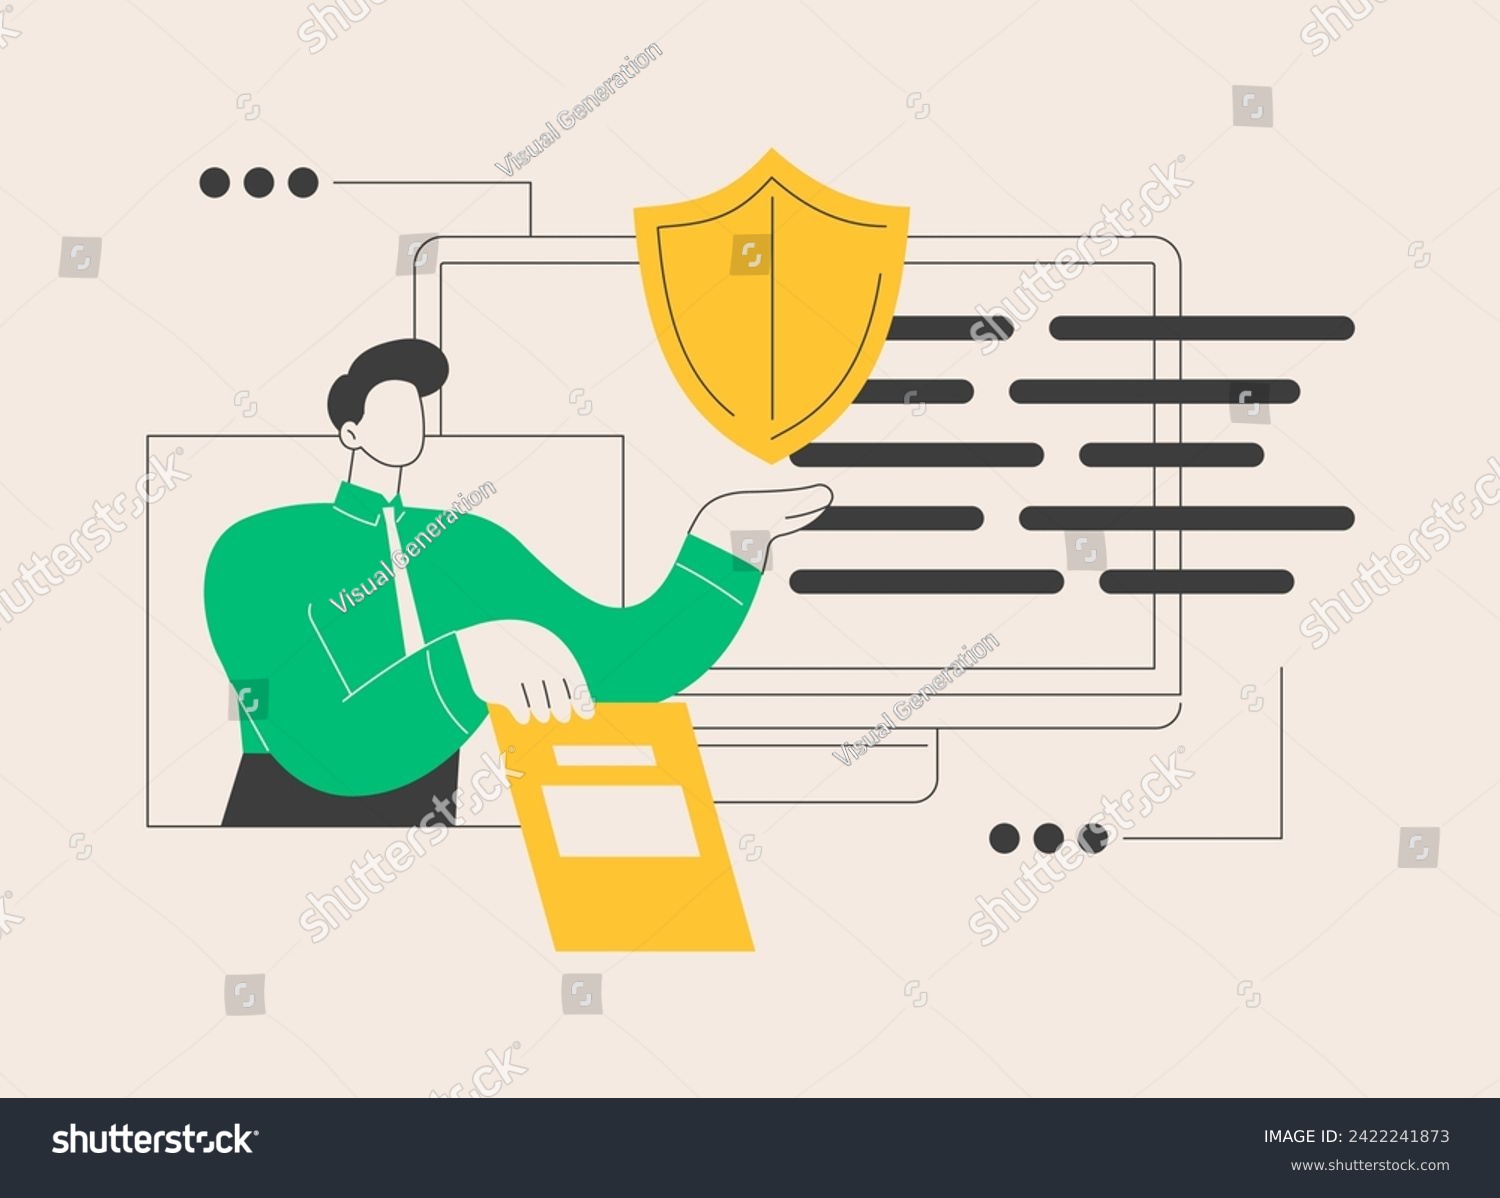 SVG of General data protection regulation abstract concept vector illustration. Personal information control and security, browser cookies permission, GDPR disclose data collection abstract metaphor. svg